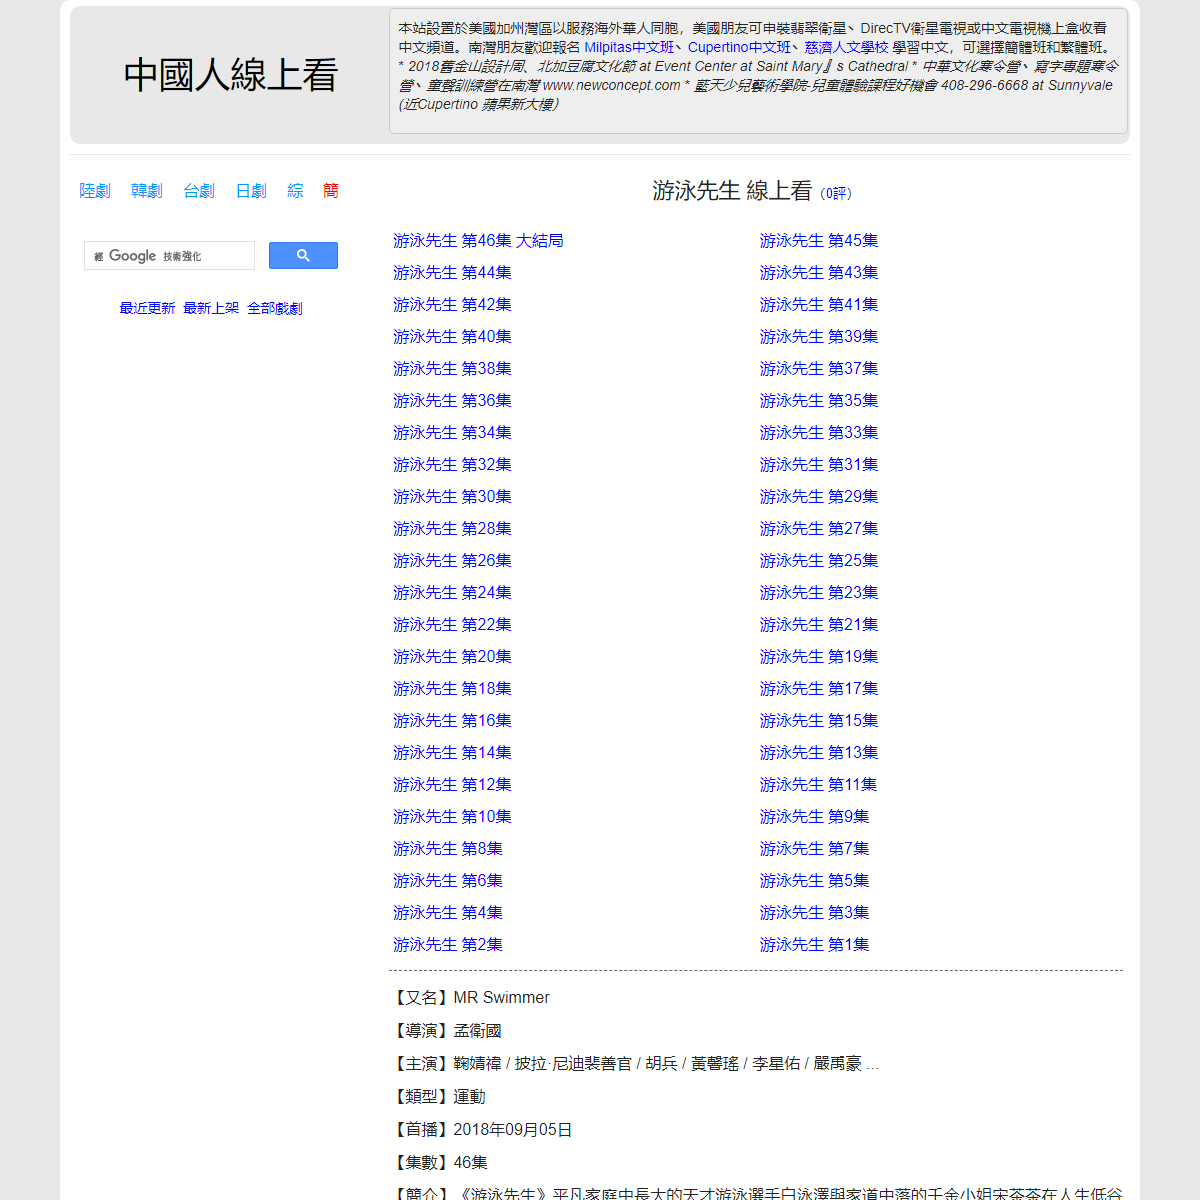 A complete backup of https://chinaq.tv/cn180905/